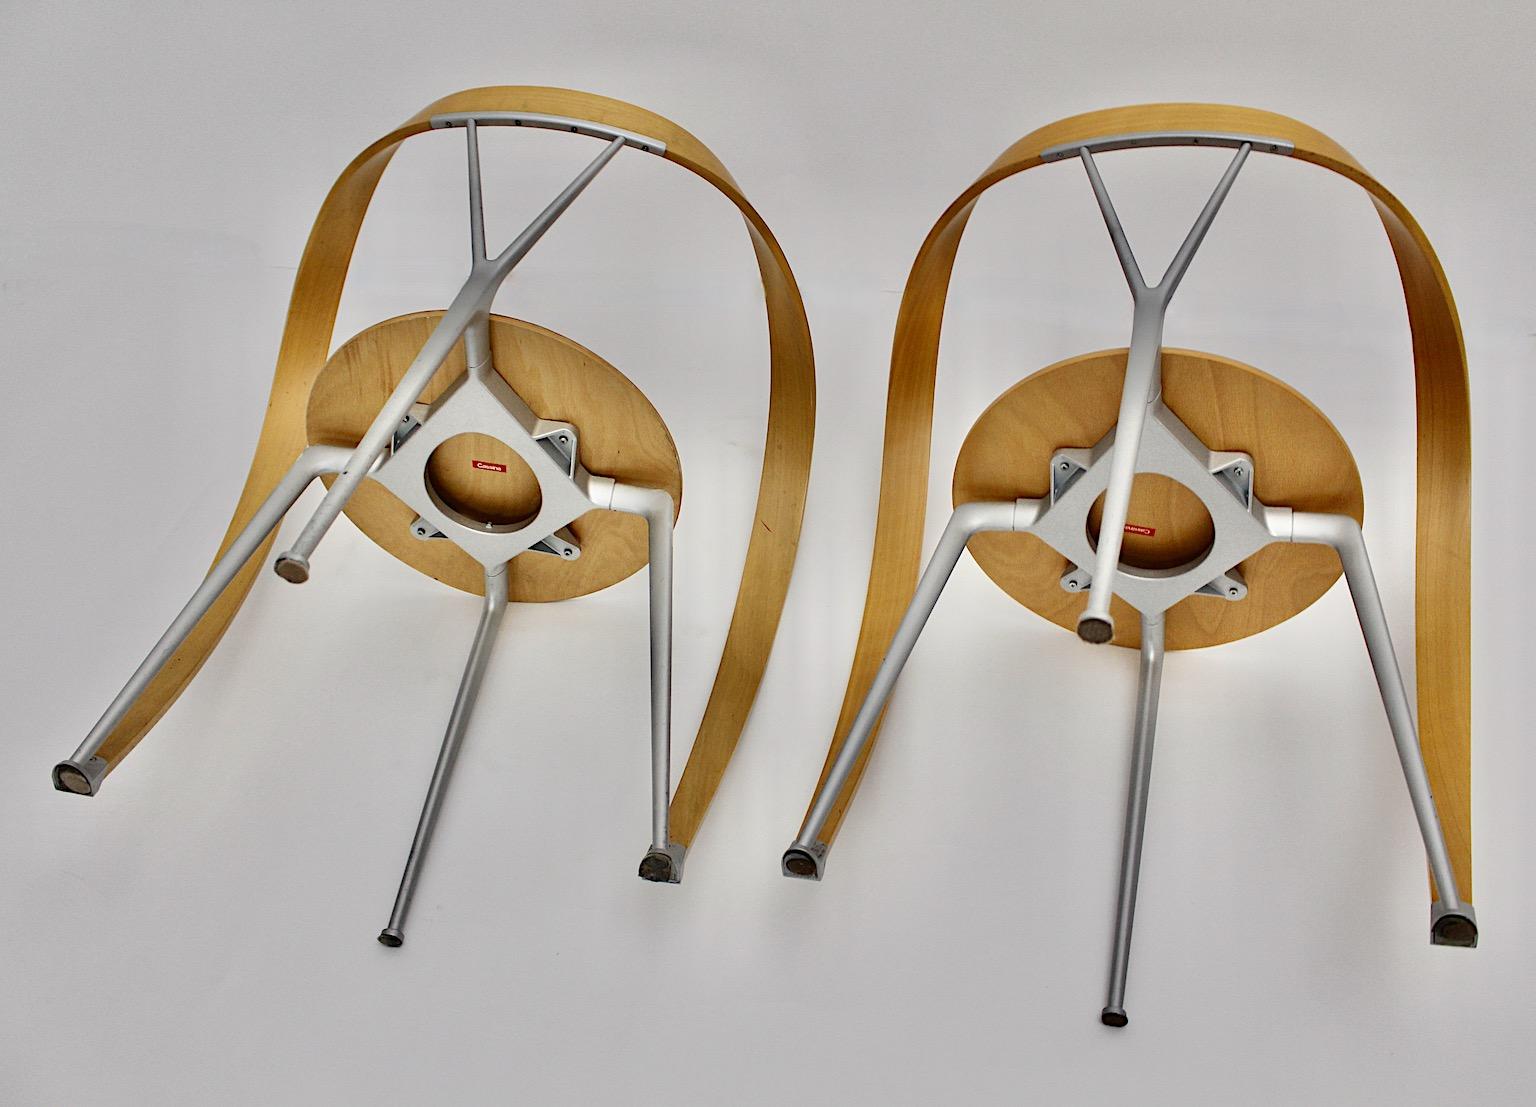 Modernist Vintage Armchairs Revers Andrea Branzi for Cassina Milan, Italy, 1993 For Sale 11